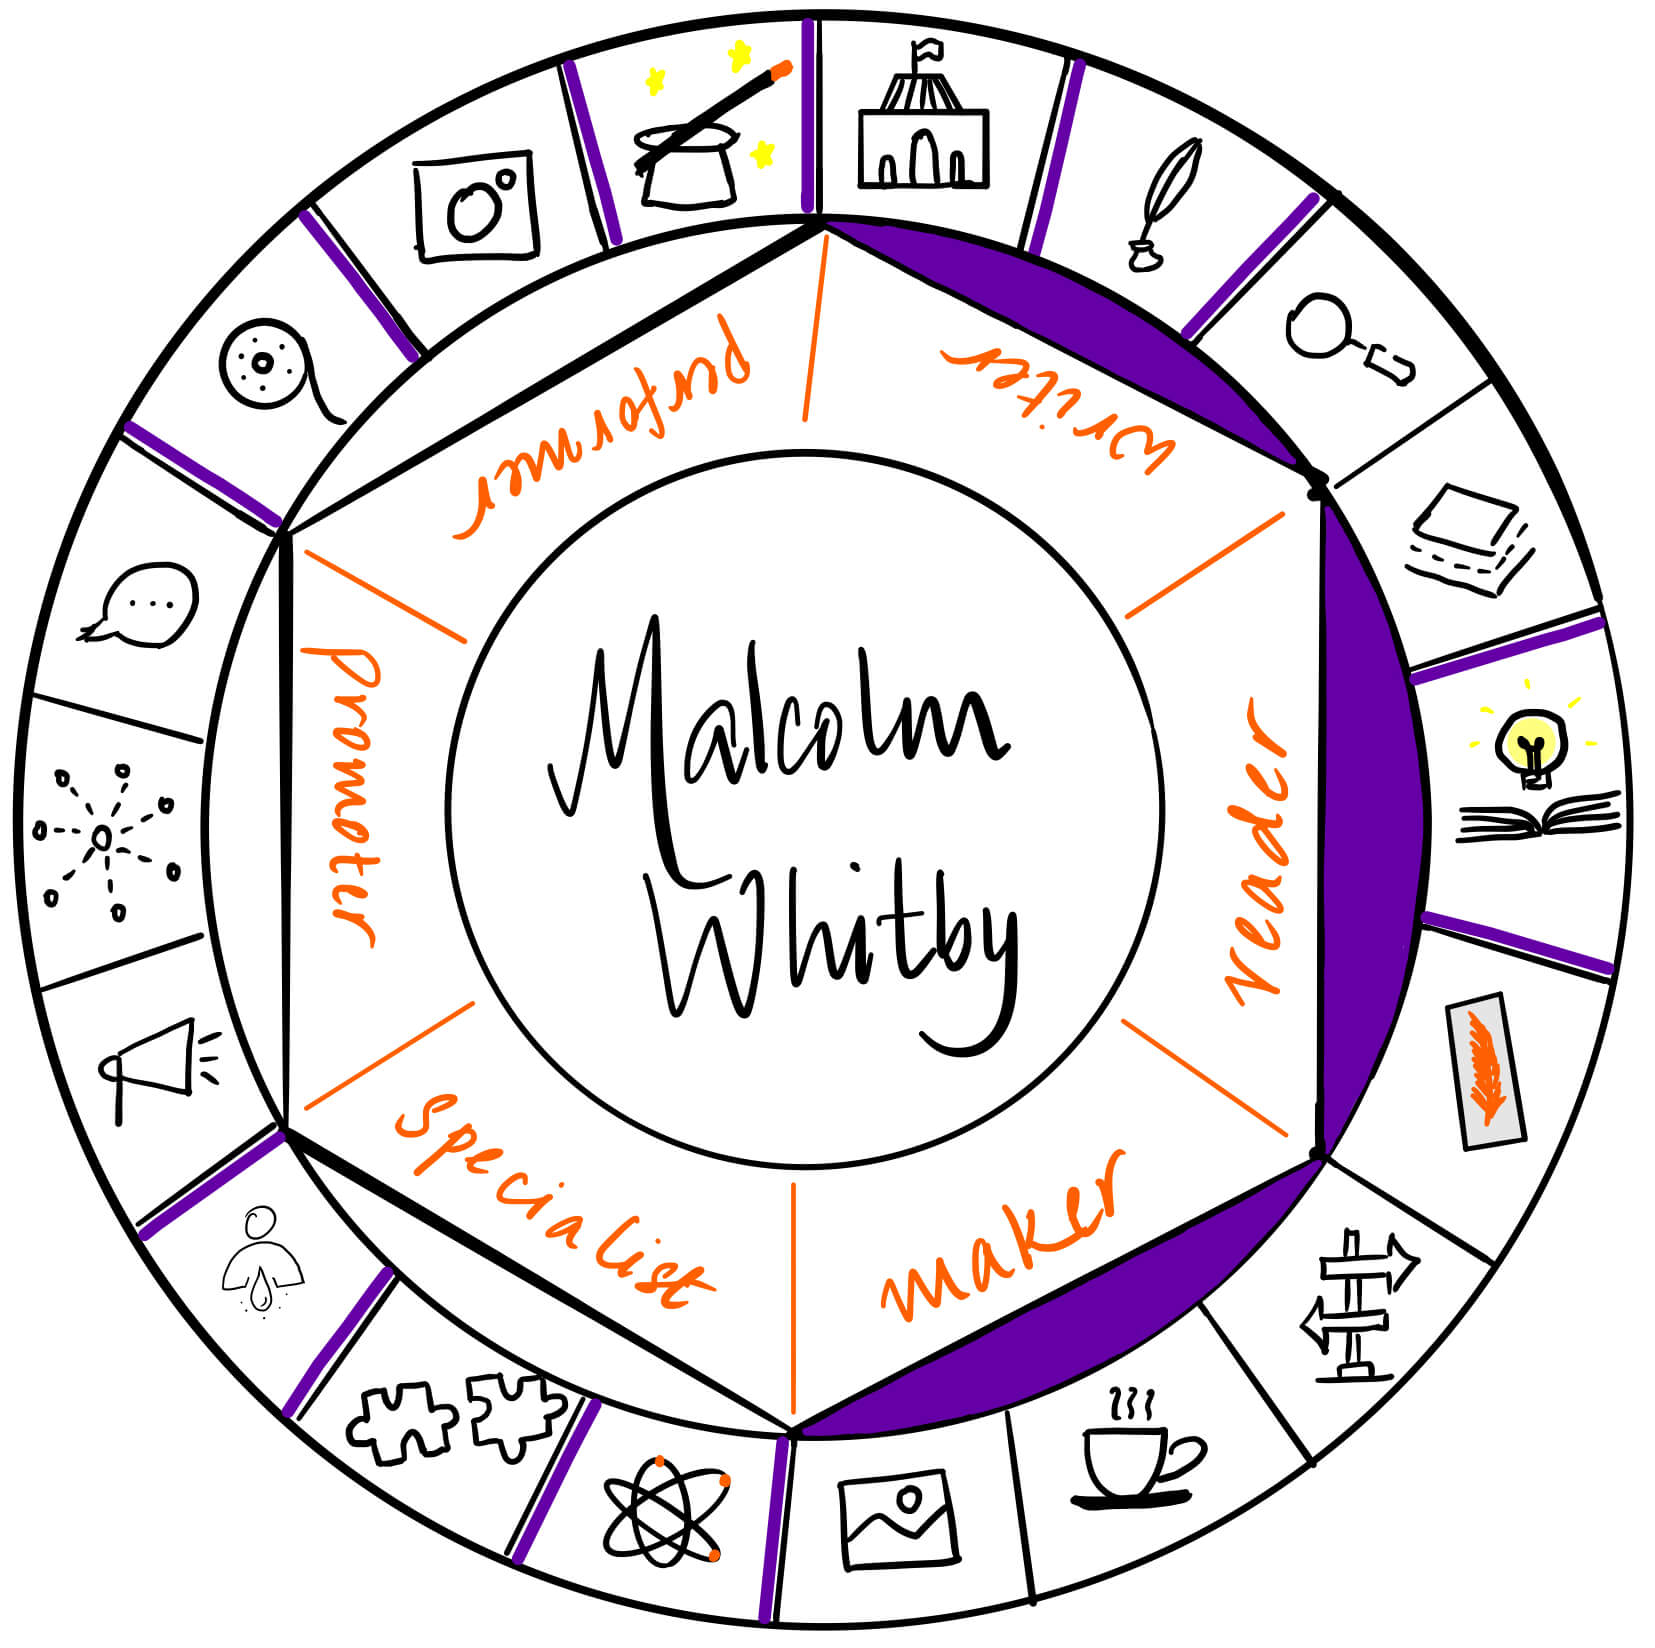 Malcolm Whitby is a reader, writer and maker. It's a pleasure to have him over on The Creator's Roulette to talk about pursuing ideas.